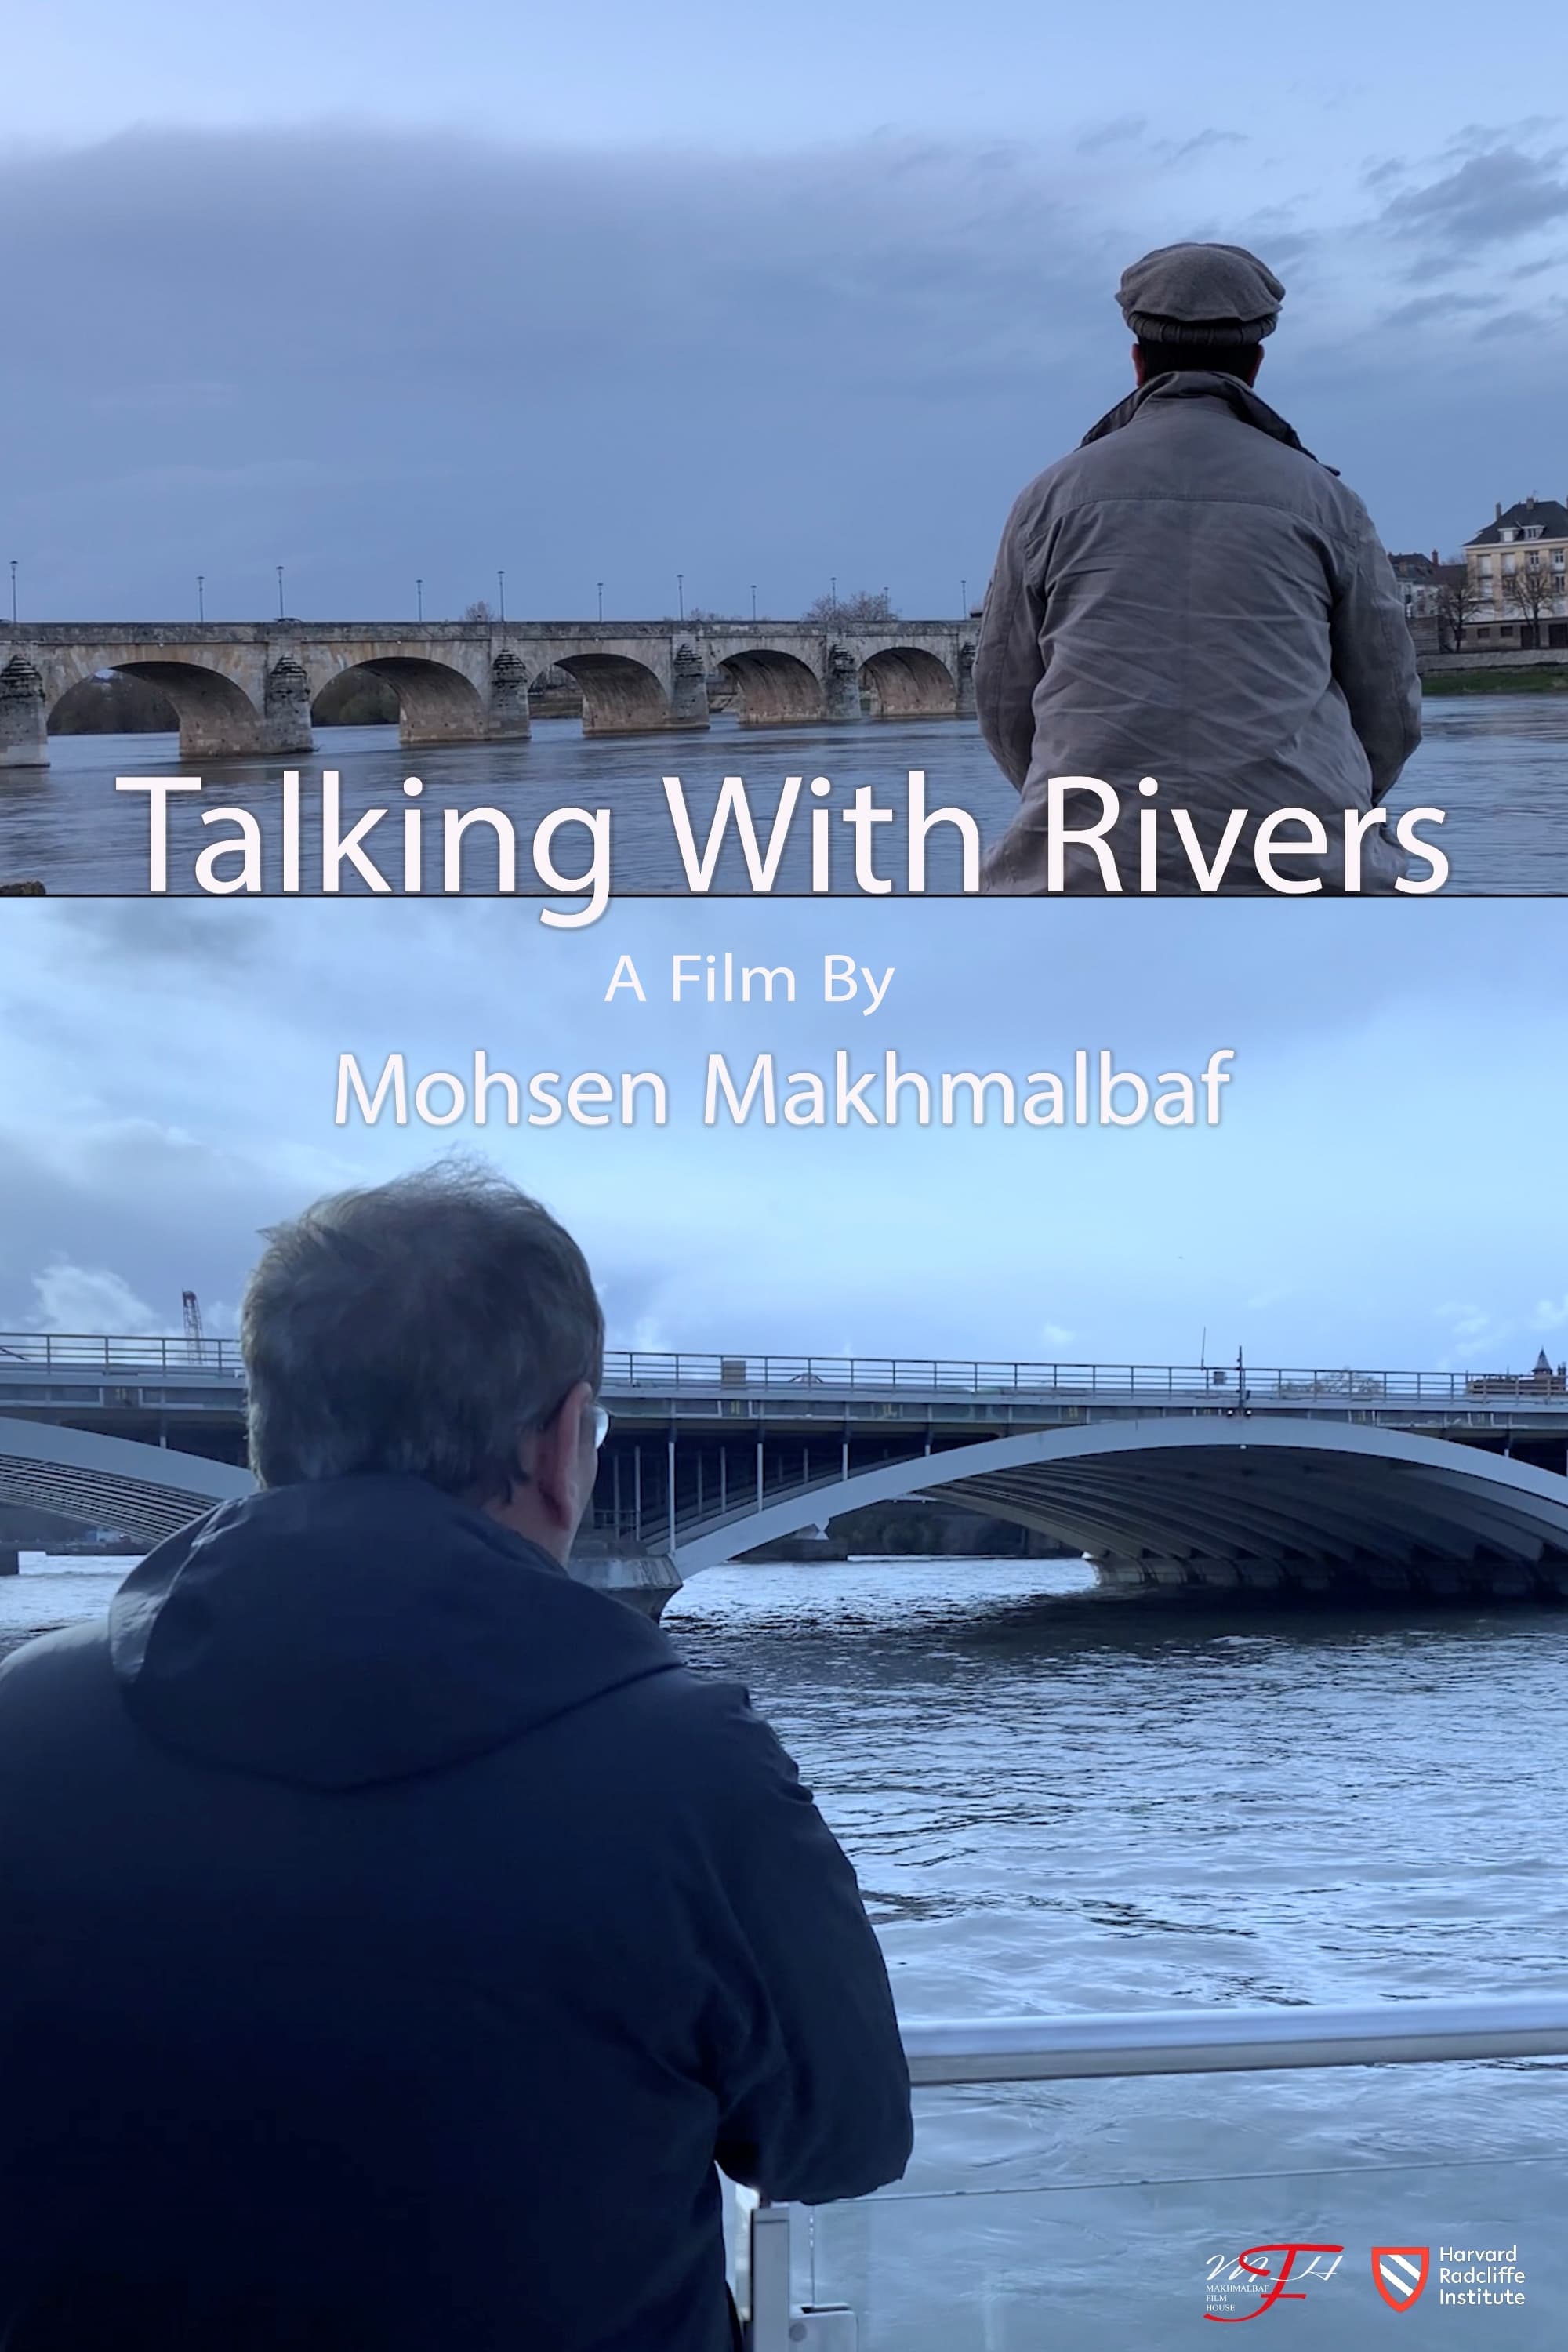 Talking with Rivers